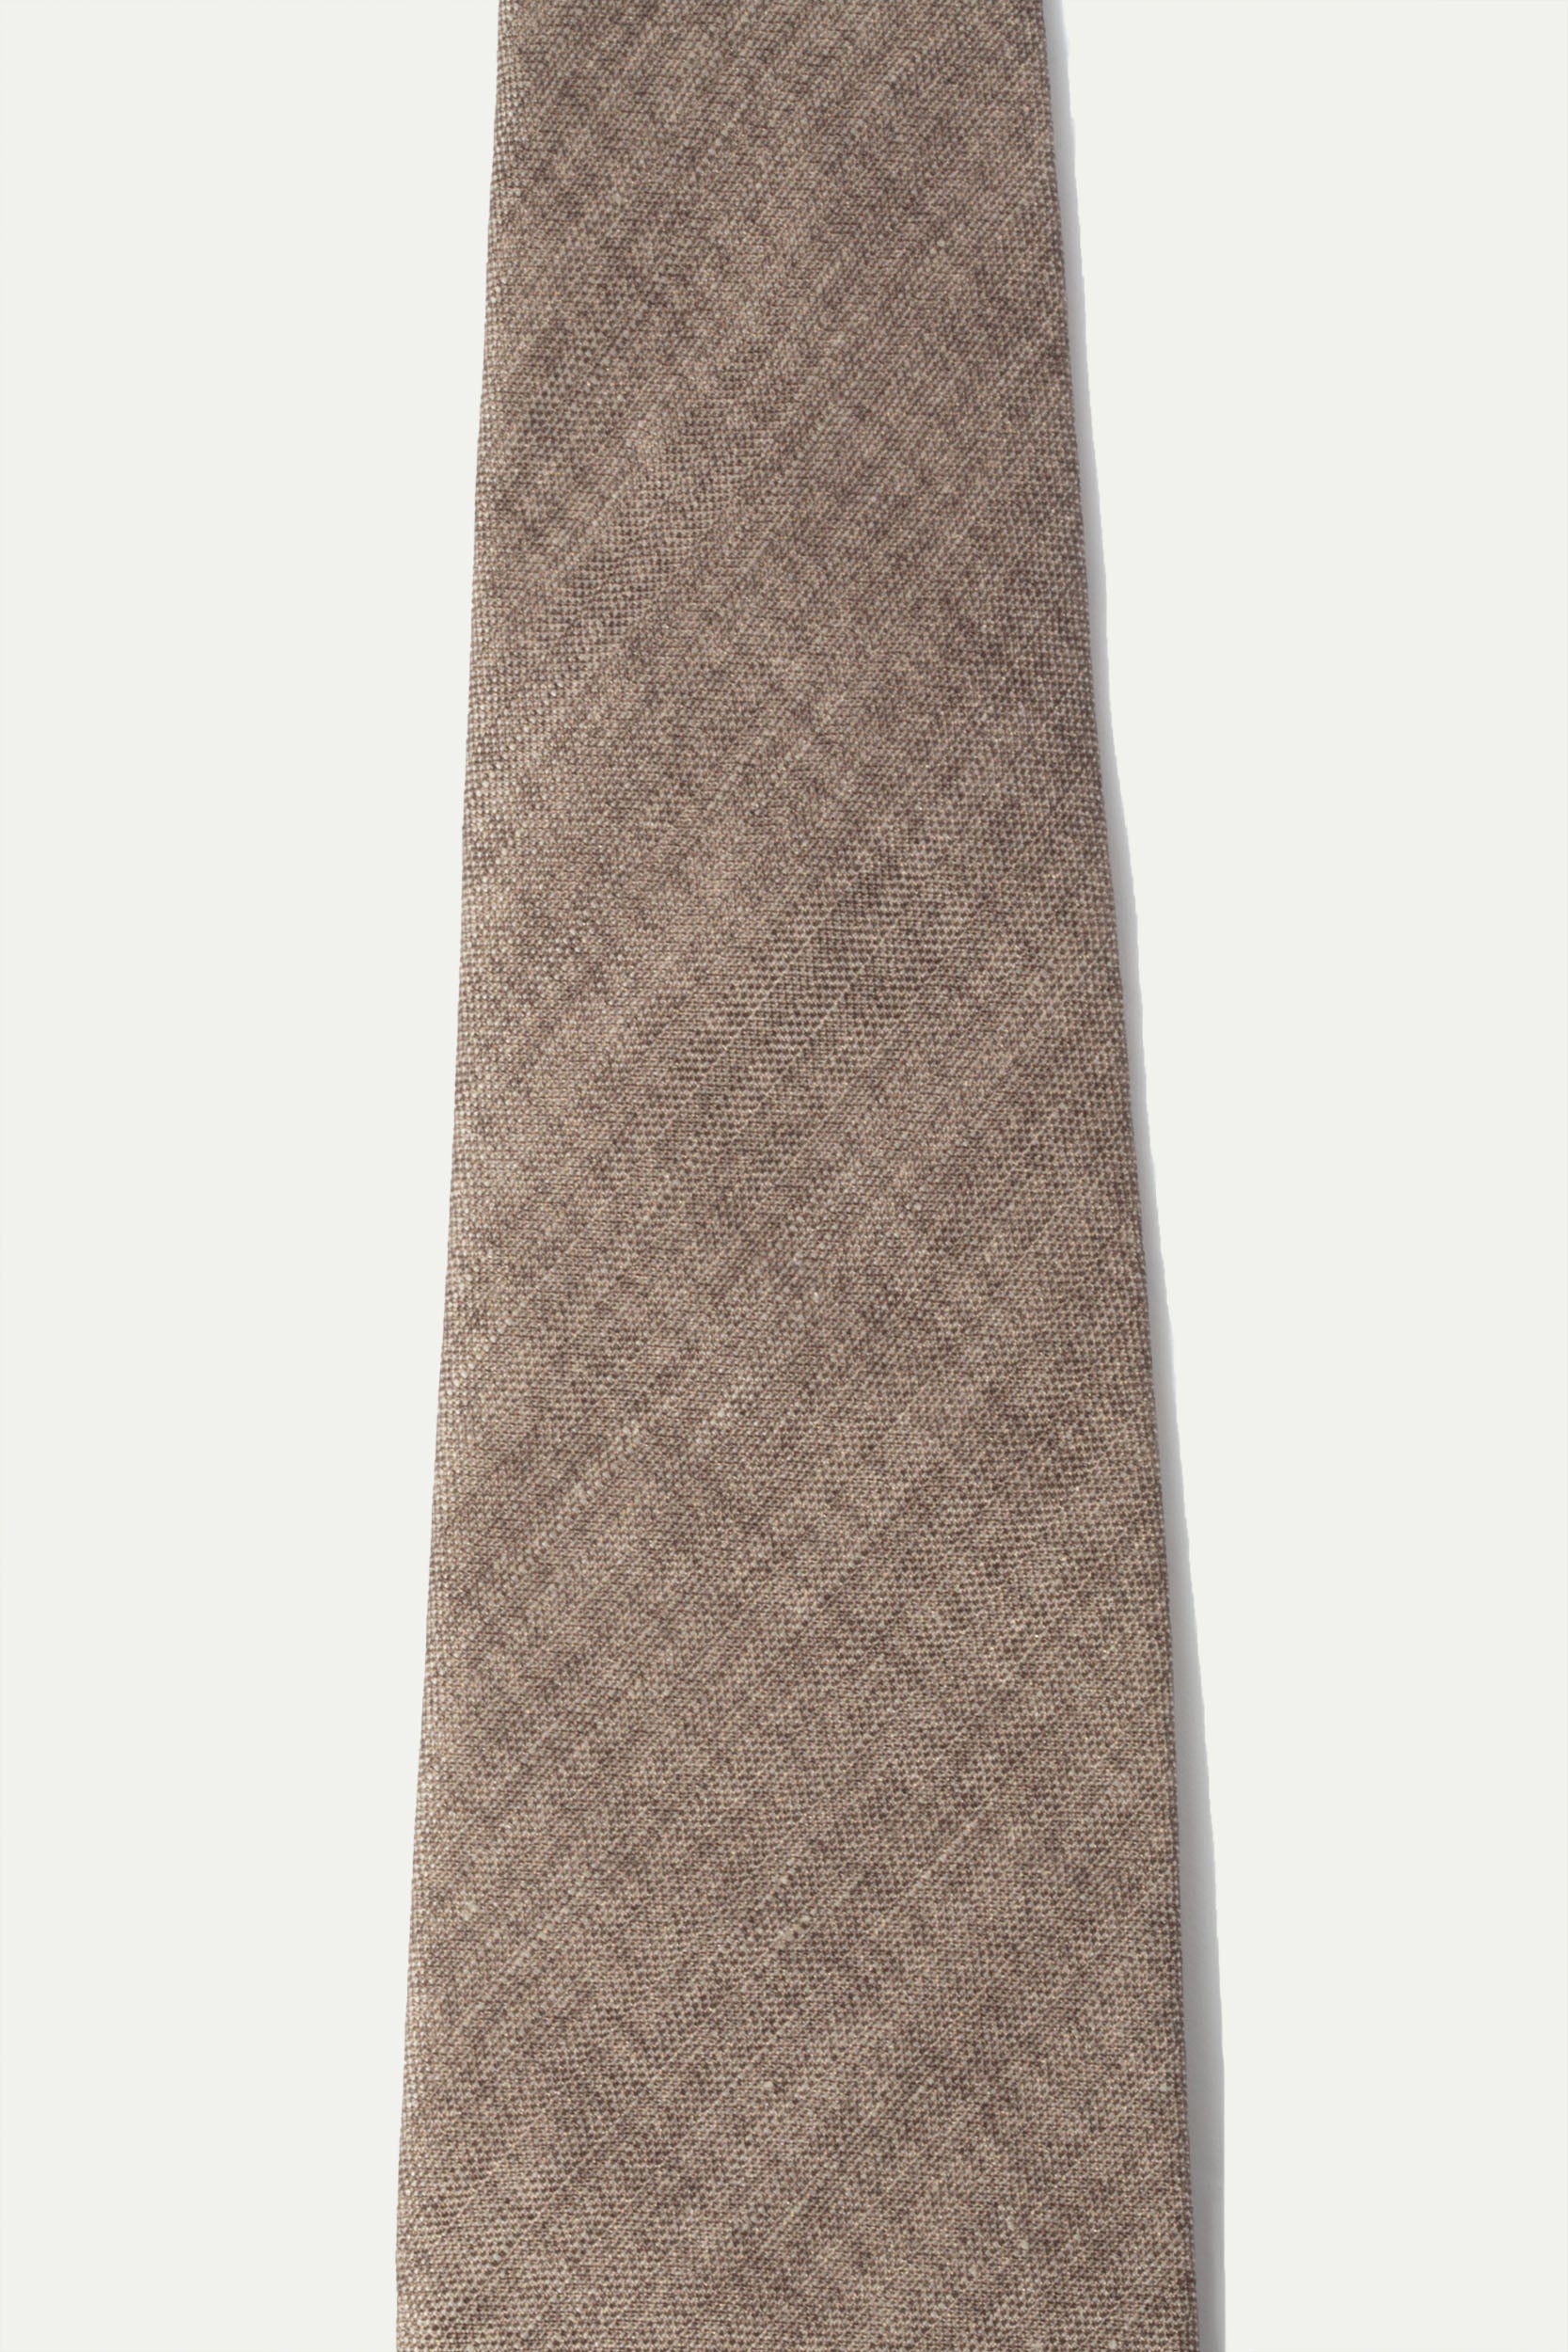 Taupe printed silk tie - Made In Italy